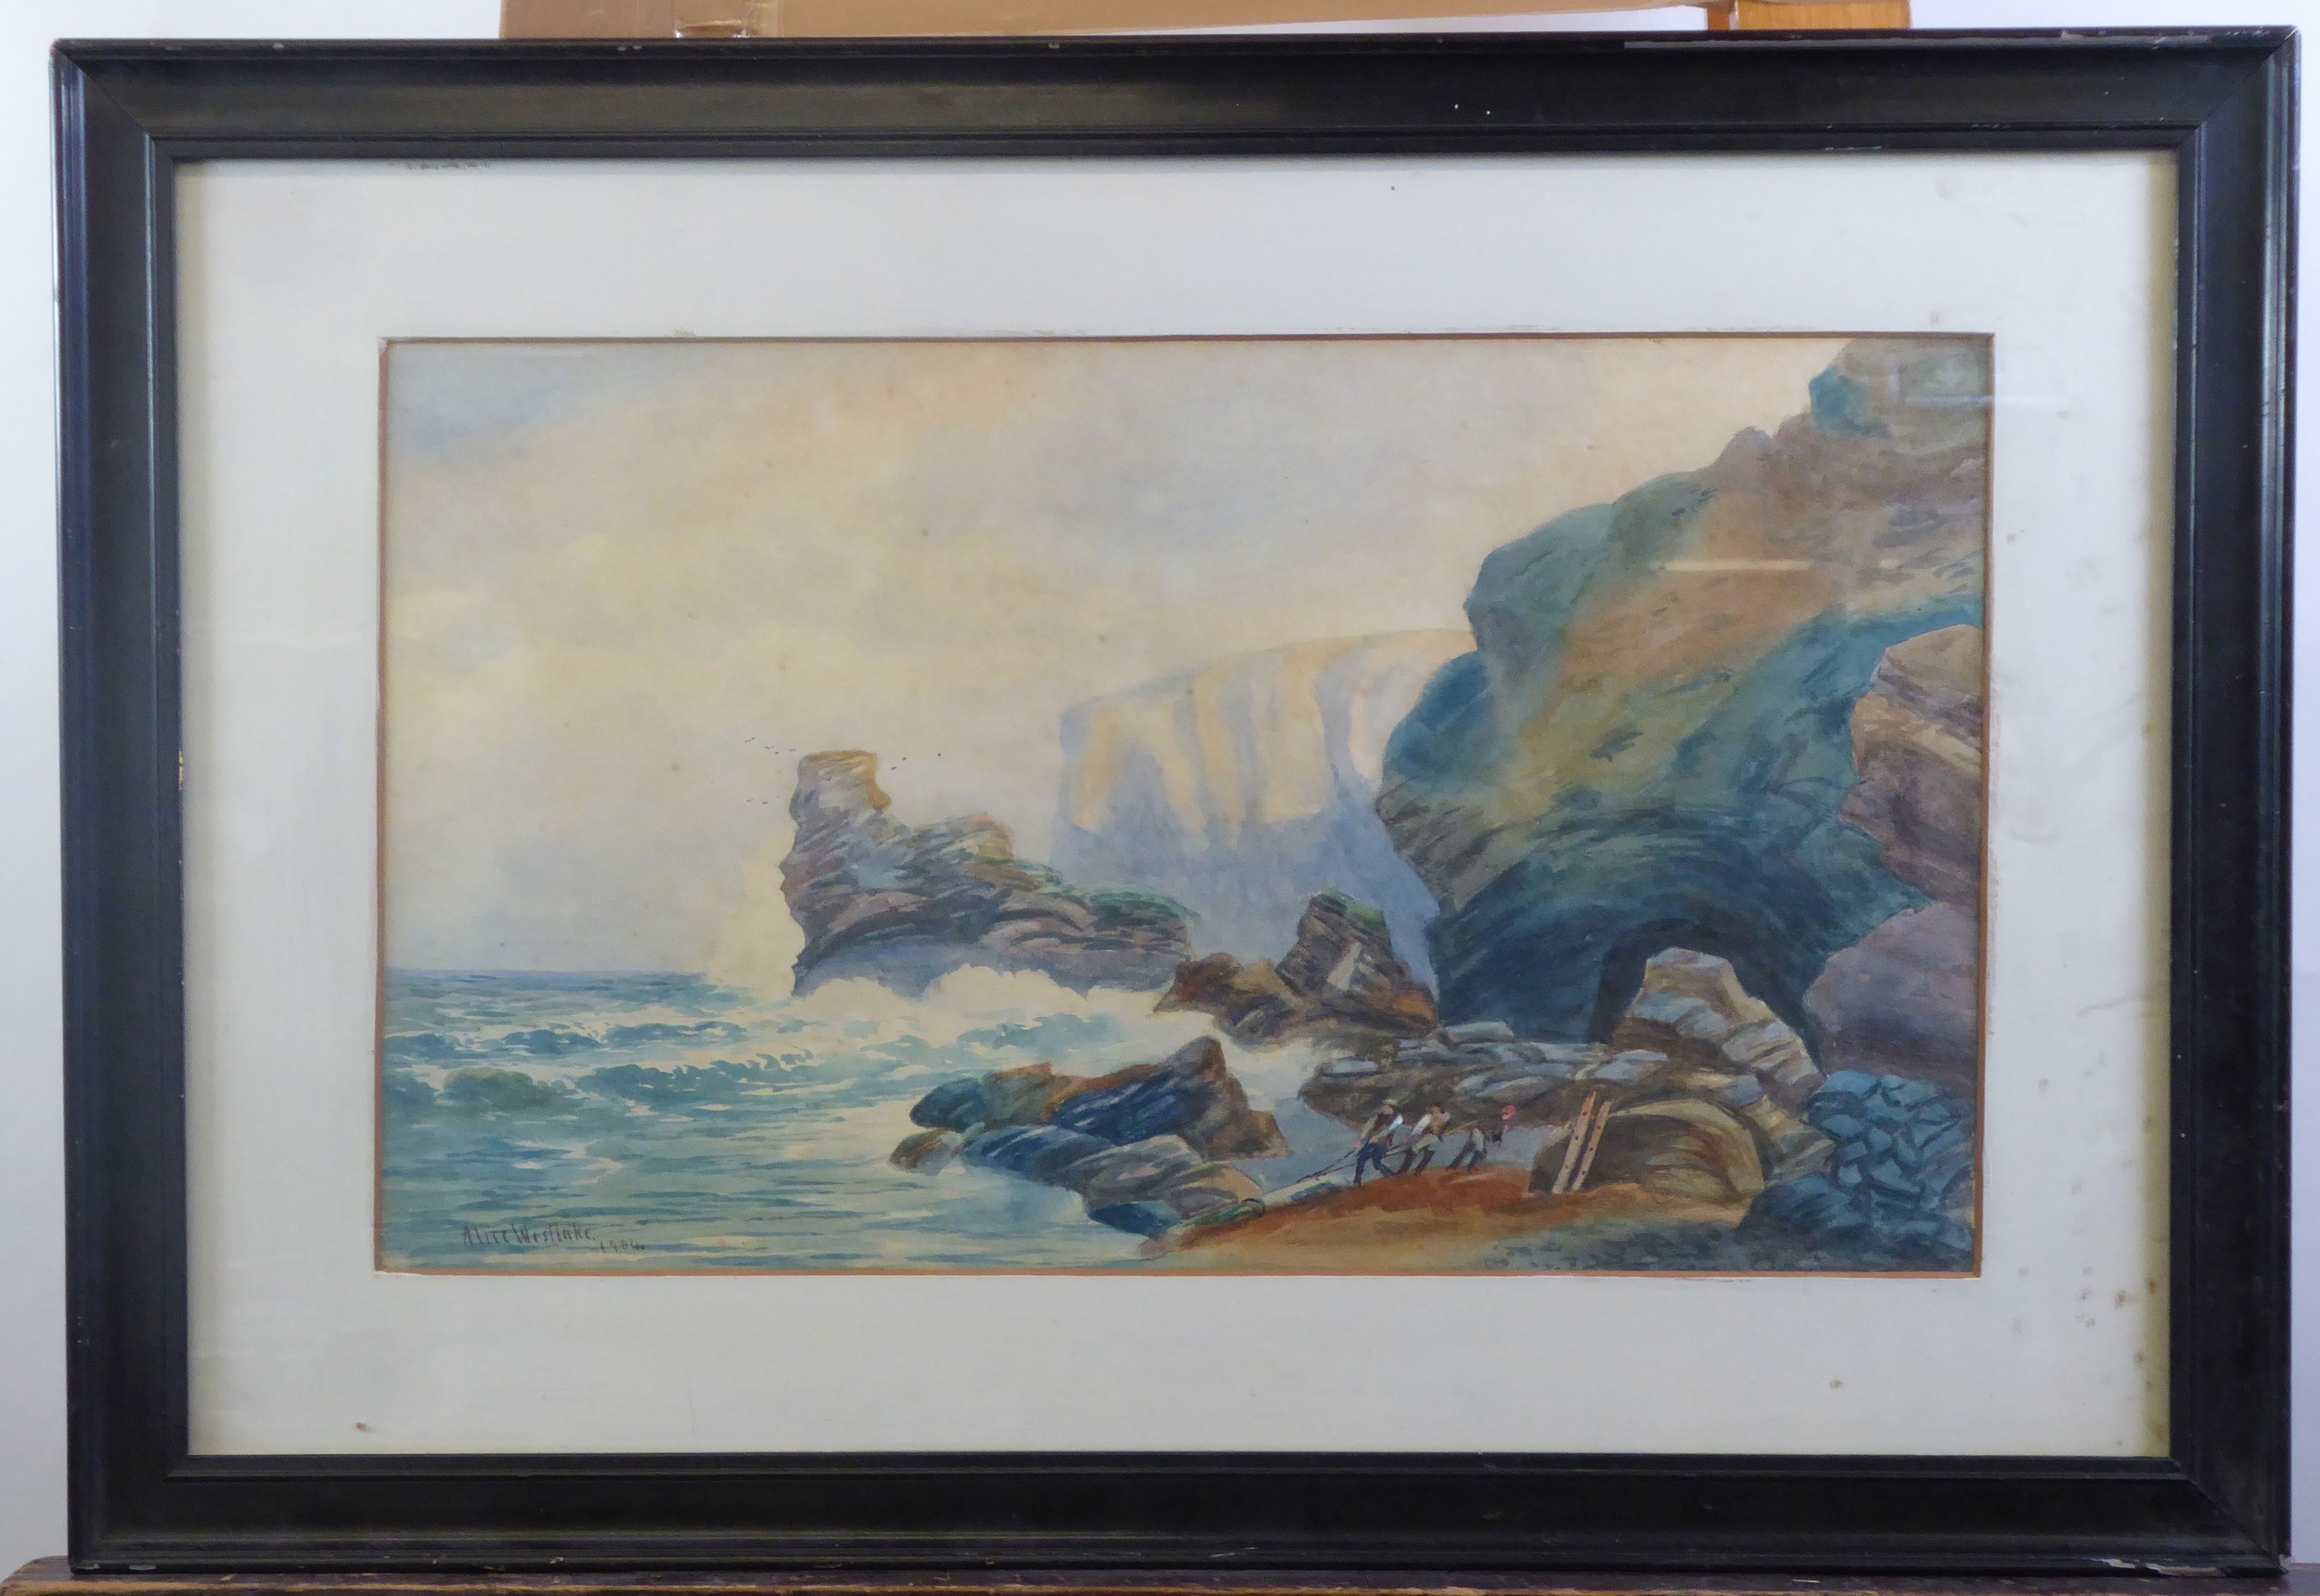 ALICE WESTLAKE (1842-1923) WATERCOLOUR ‘Watergate Bay, Newquay’ Signed, titled and dated 1904 - Image 2 of 2